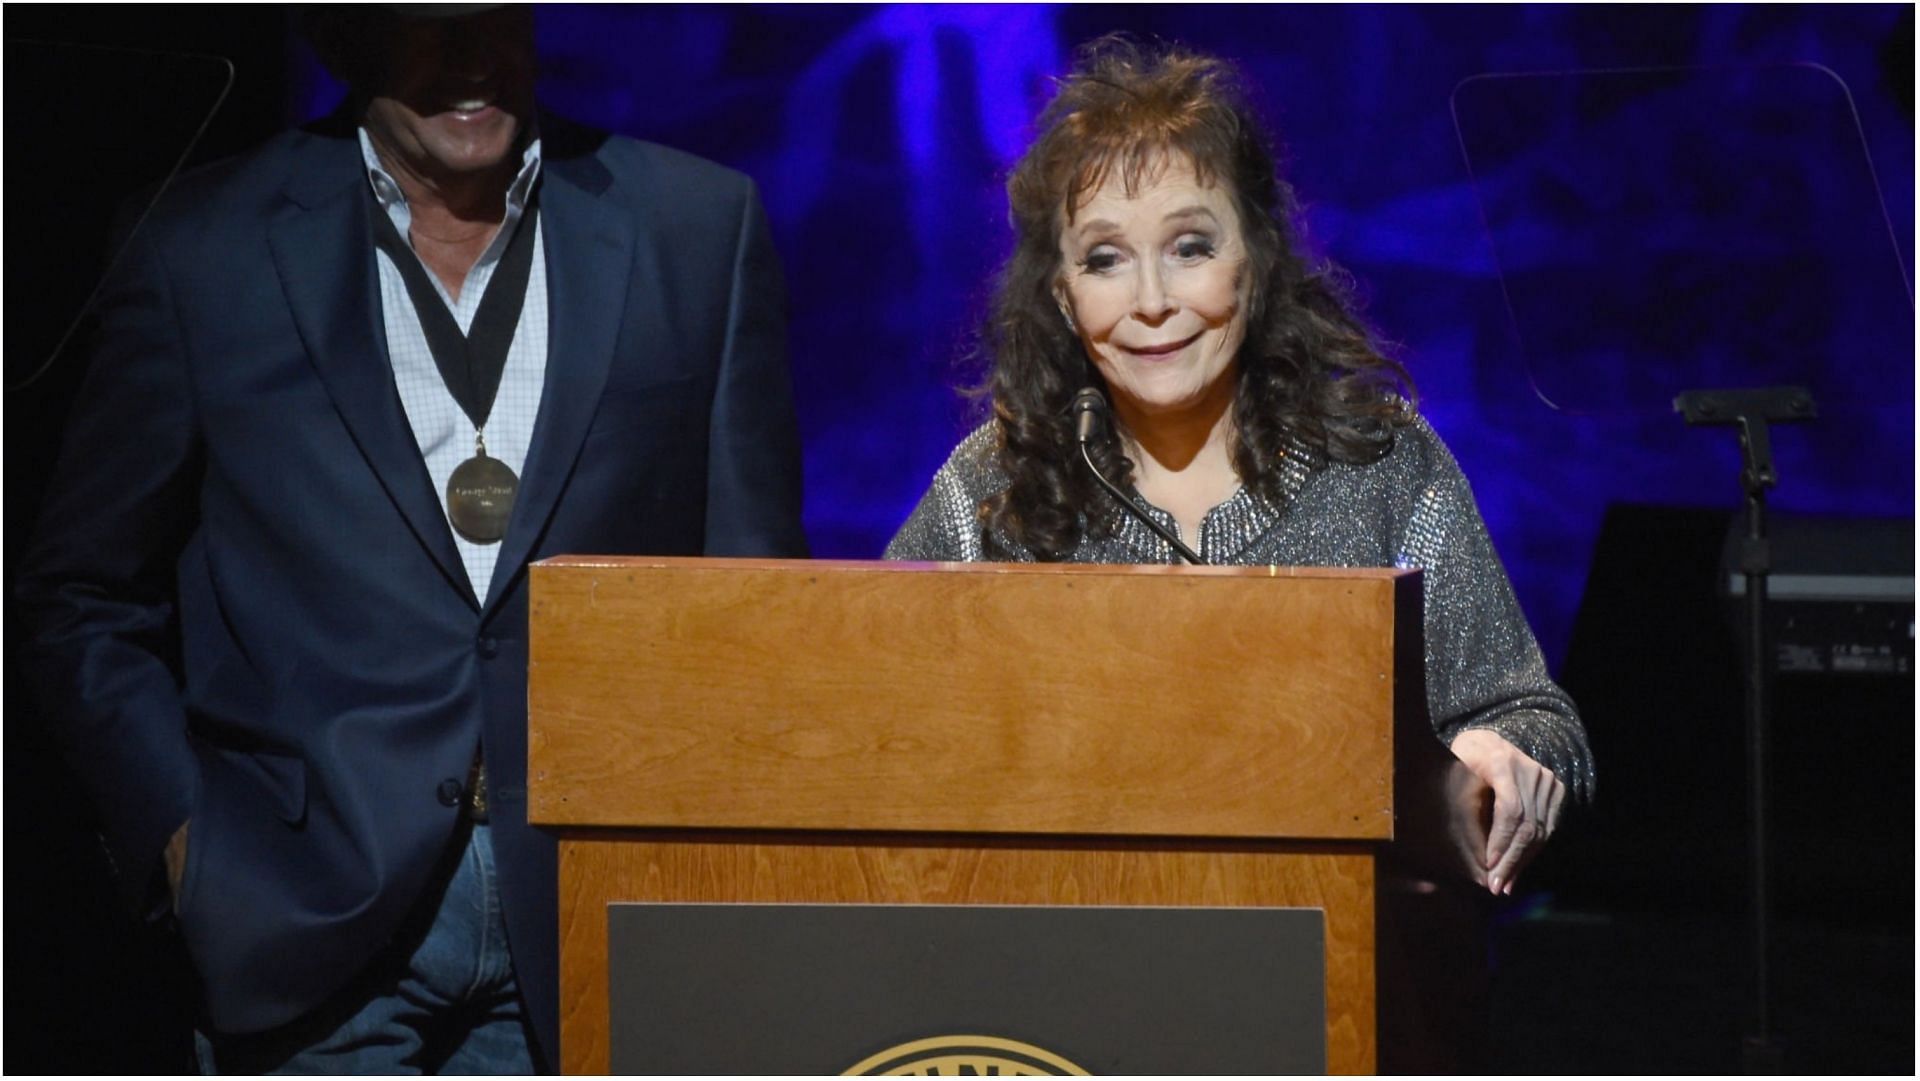 Loretta Lynn recently died at the age of 90 (Image via Rick Diamond/Getty Images)